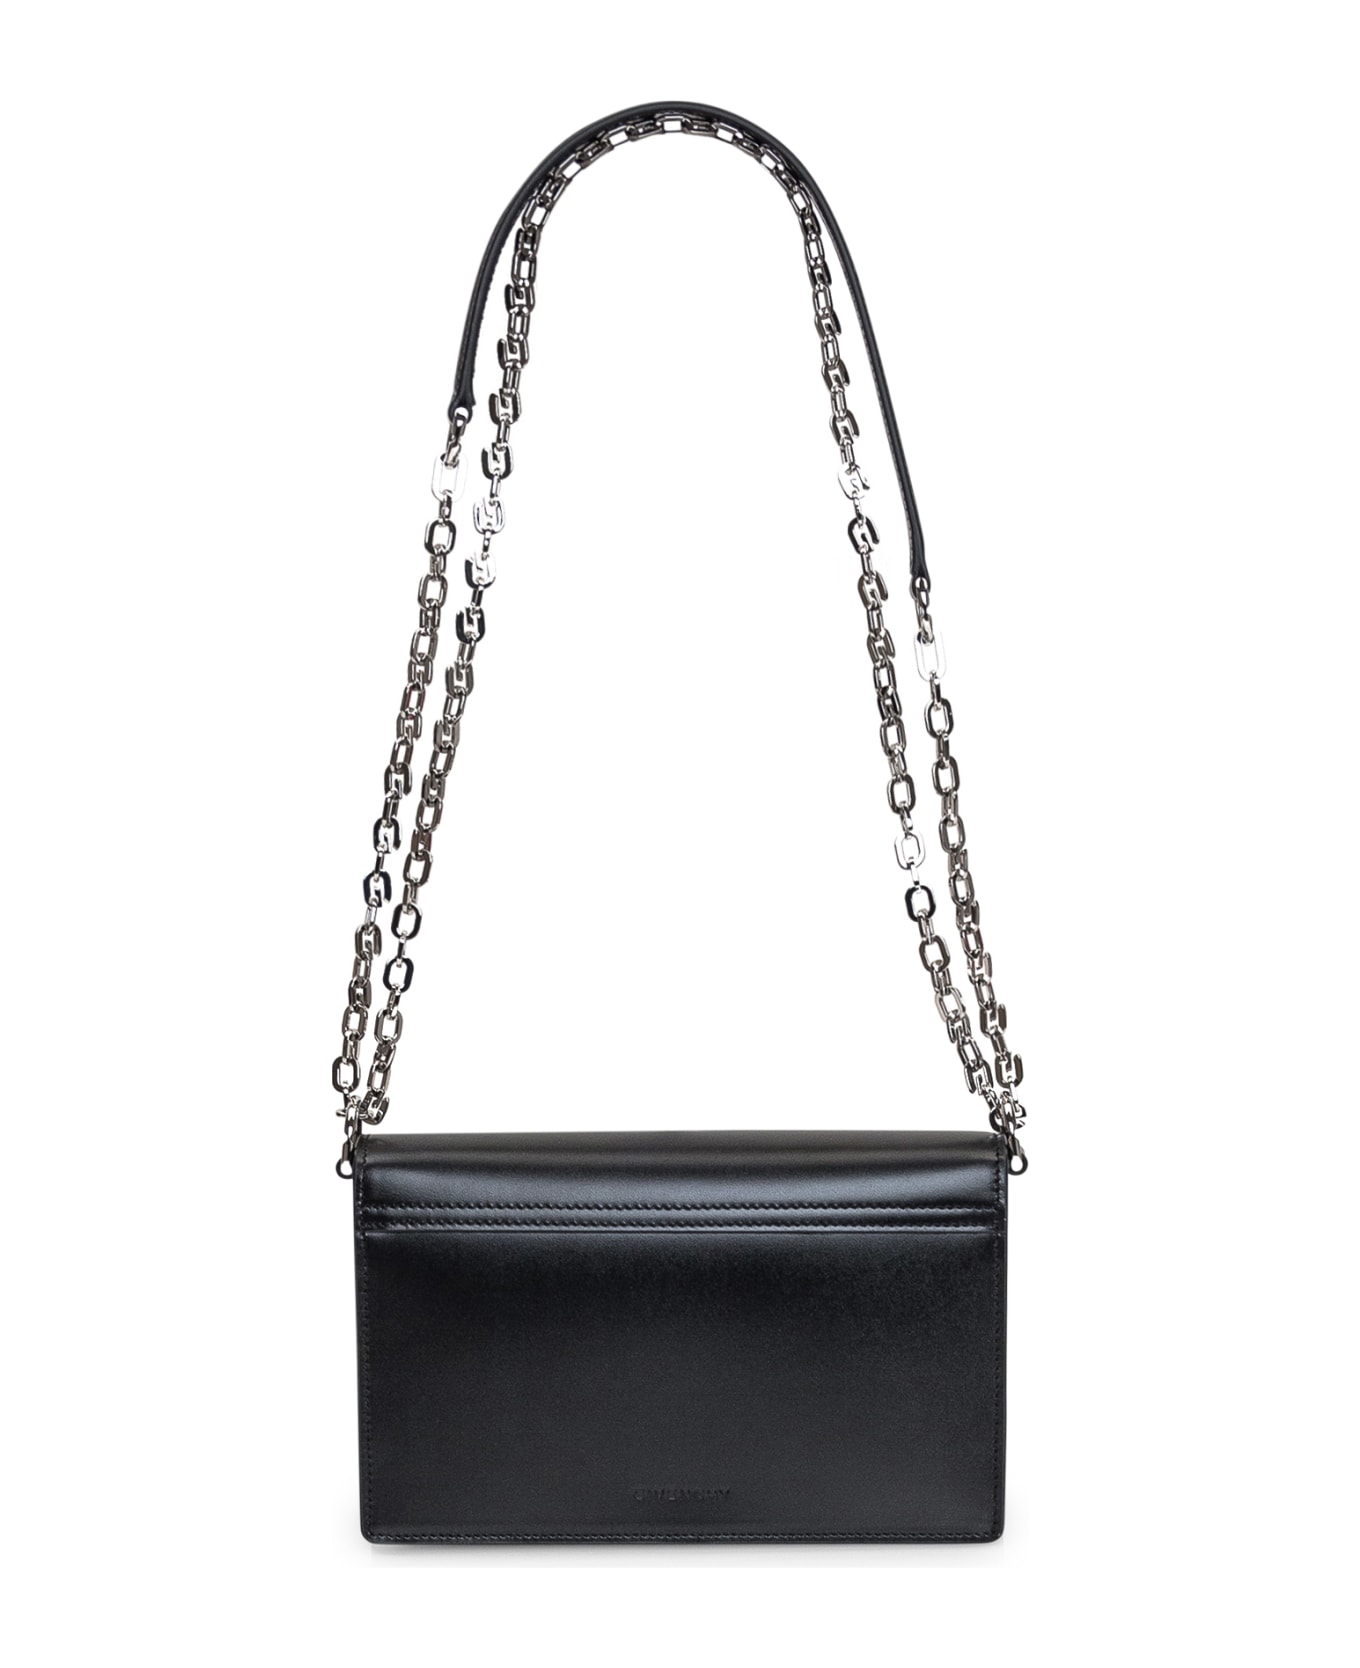 Givenchy Small Crossbody Leather Bag - Black